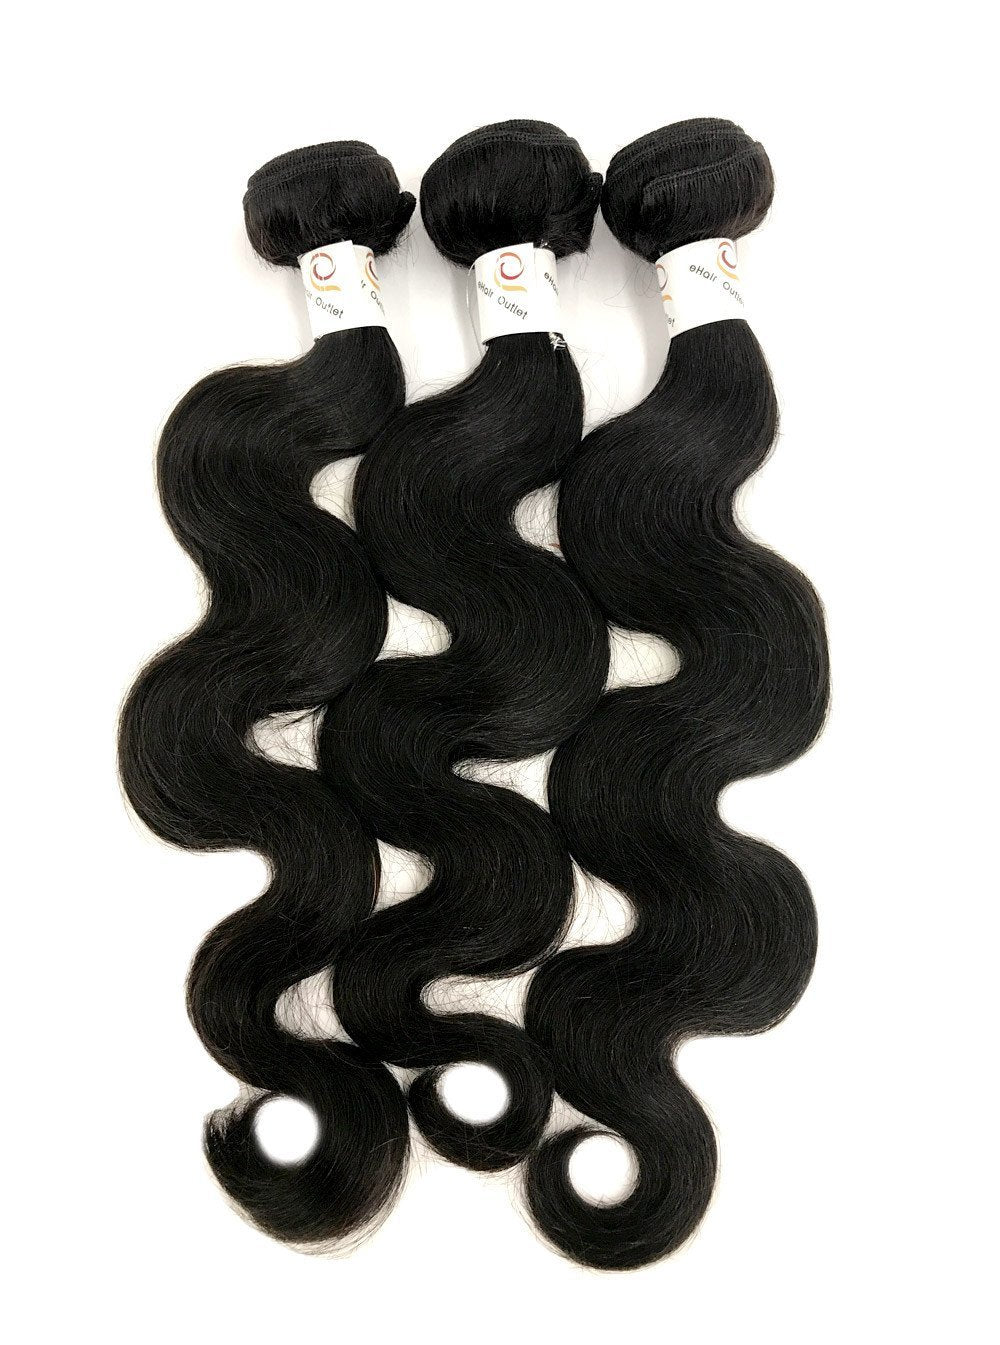 Load image into Gallery viewer, 8A Malaysian 3 Bundle Set Body Wave Virgin Human Hair Extension w/ Lace Closure - eHair Outlet
